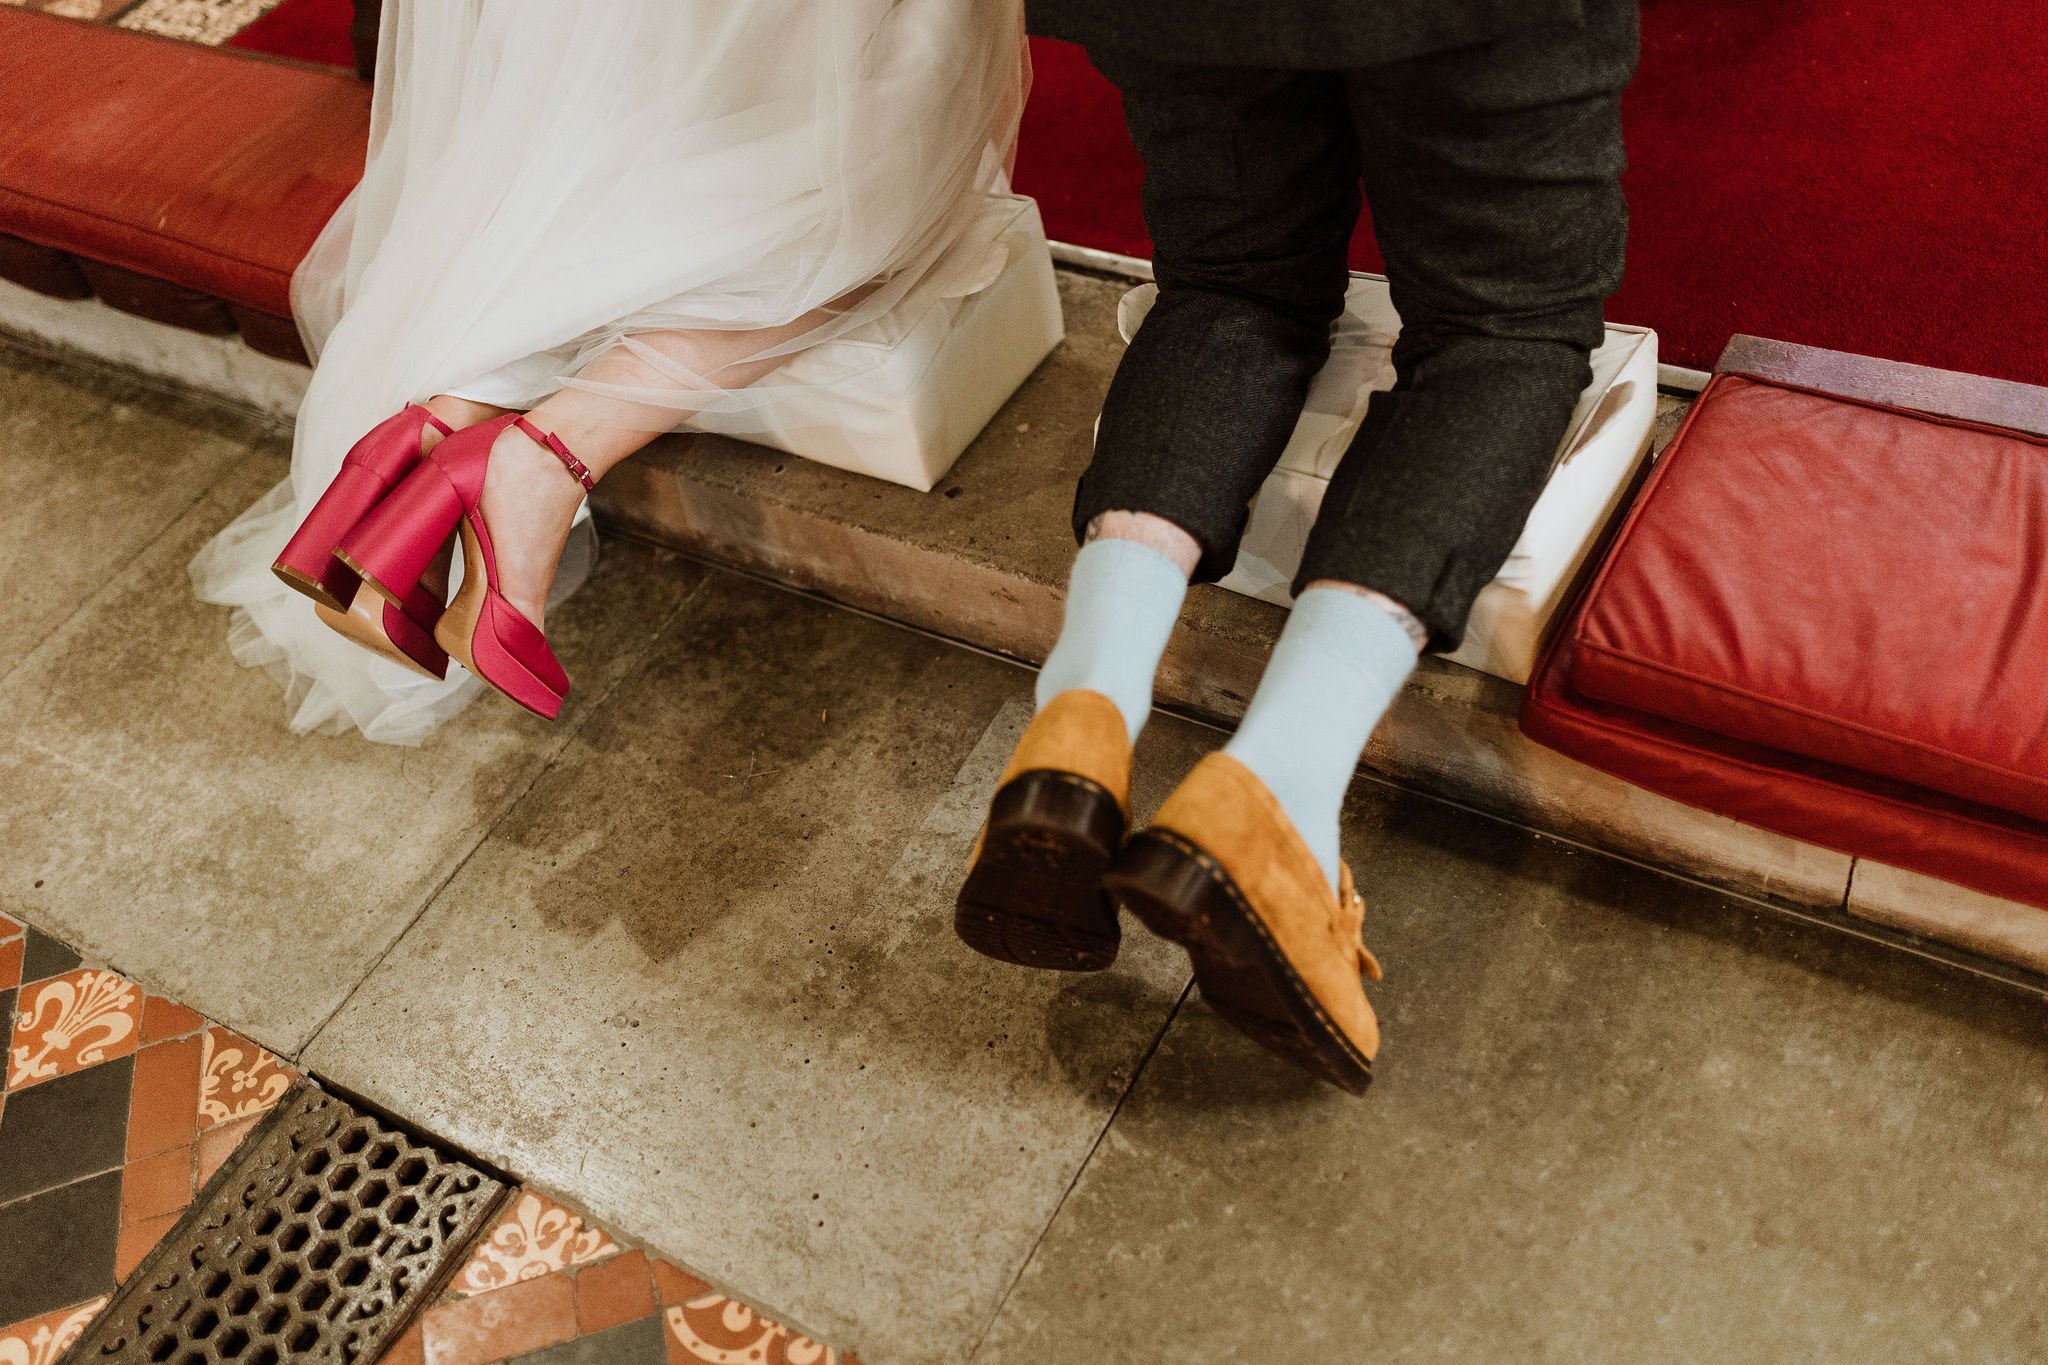  The bride and groom are kneeling down on white cushions placed on the stone church floor. You can see the brides bright pink platform heeled shoes with a pink ankle strap and you can just see the material from her long white wedding dress. To the ri